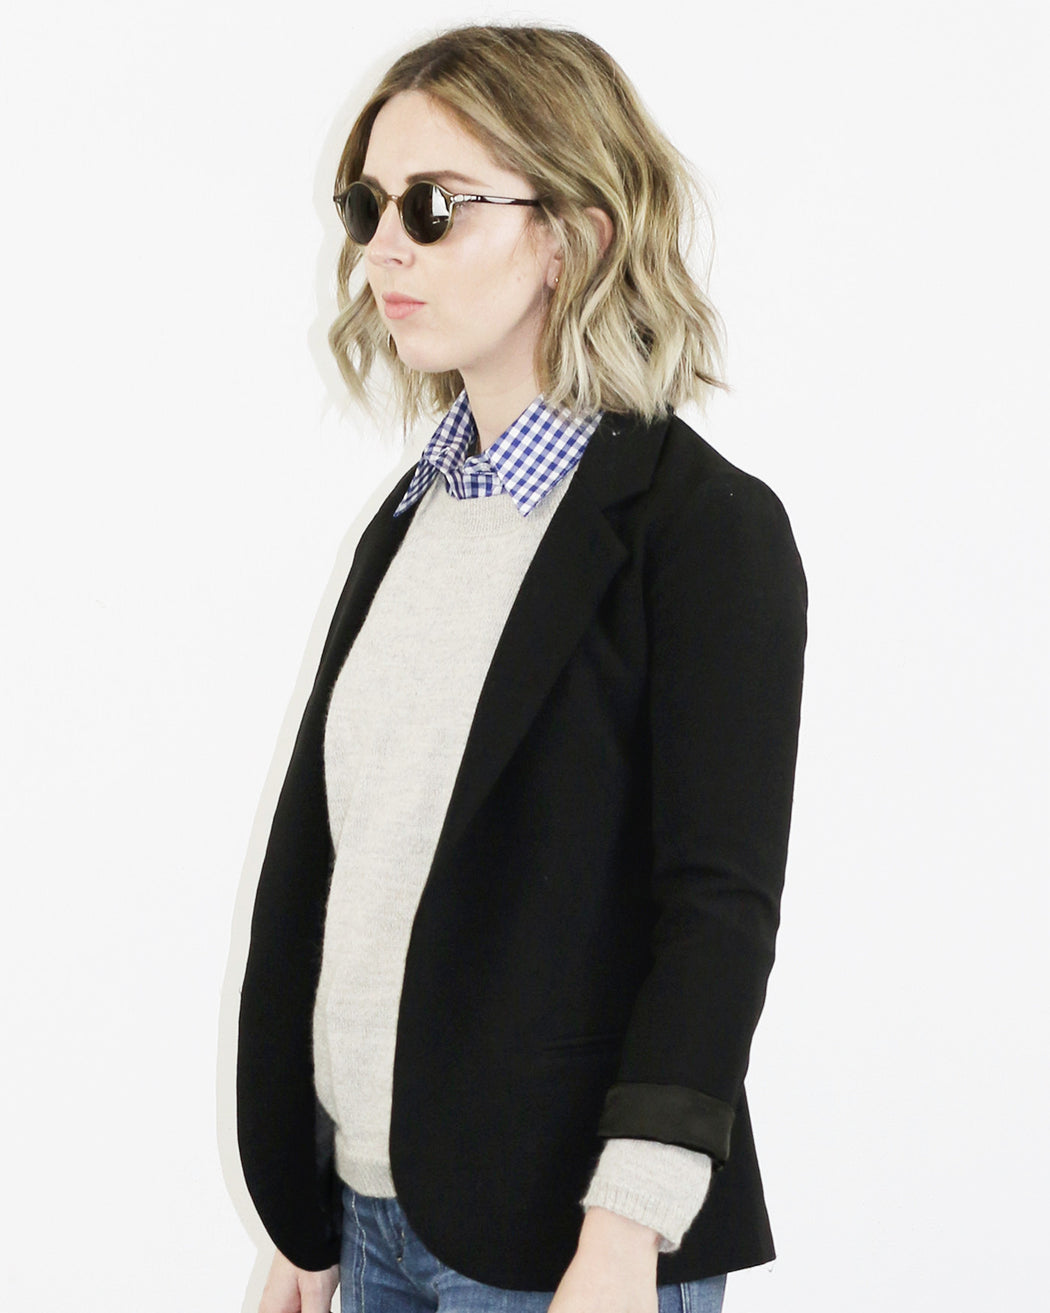 Le Cou:wakefield dickey // blue gingham,ANOMIE